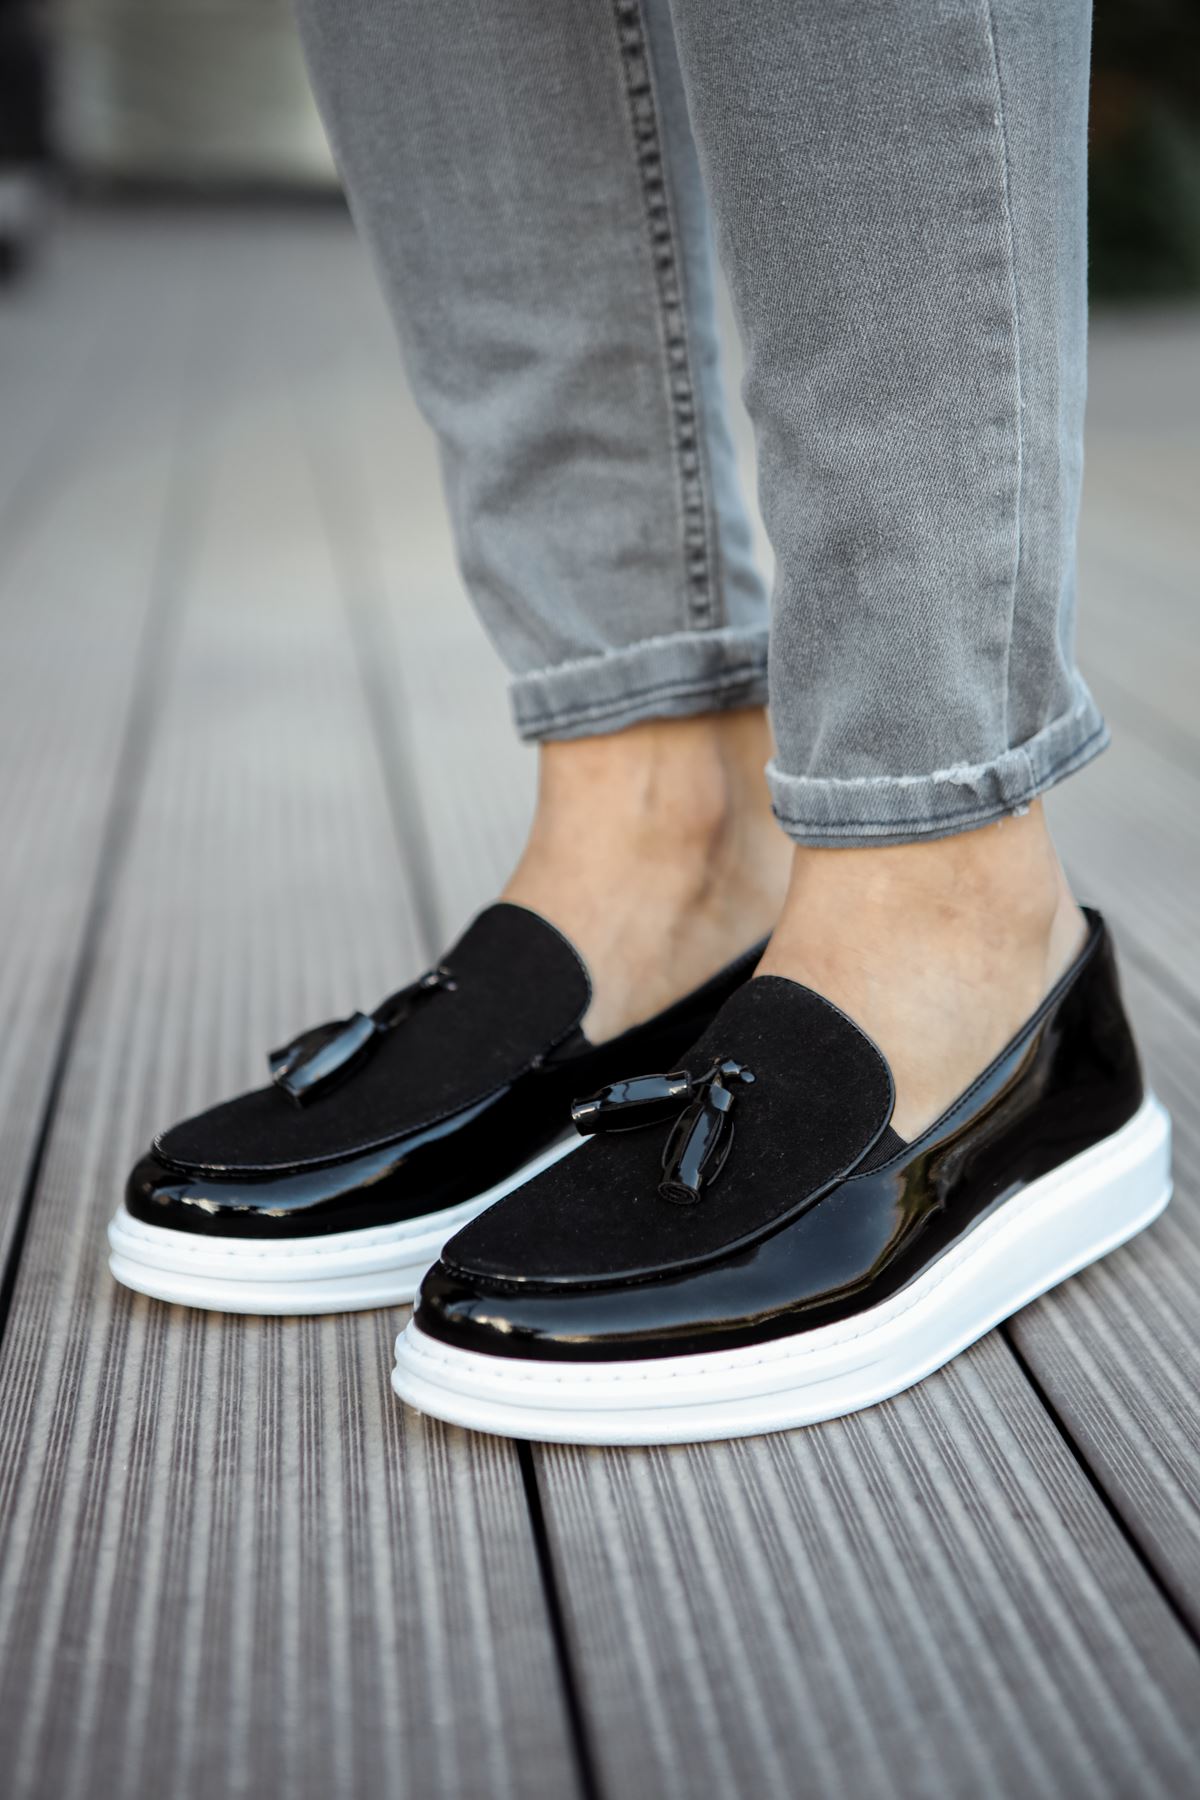 Chekich Shoes Black Men Dress Classic Polished and Suede Non Leather Slip On Luxury Style Business For Suits Wedding Special Air Party Office Fashion Vintage 2021 Formal Wear CH002 V2